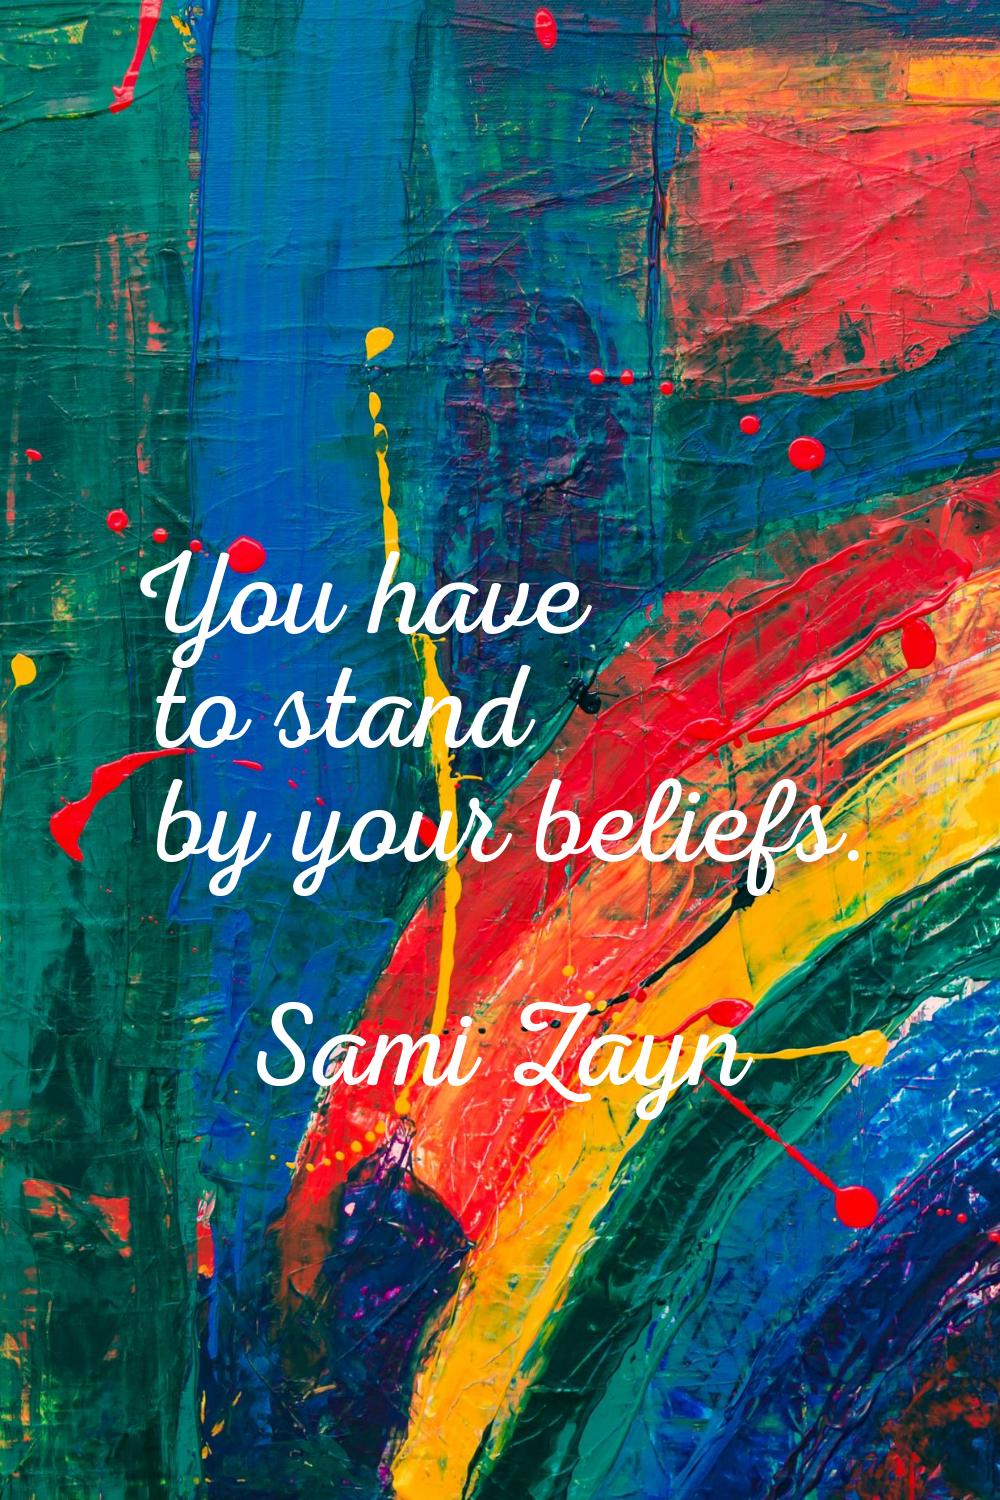 You have to stand by your beliefs.